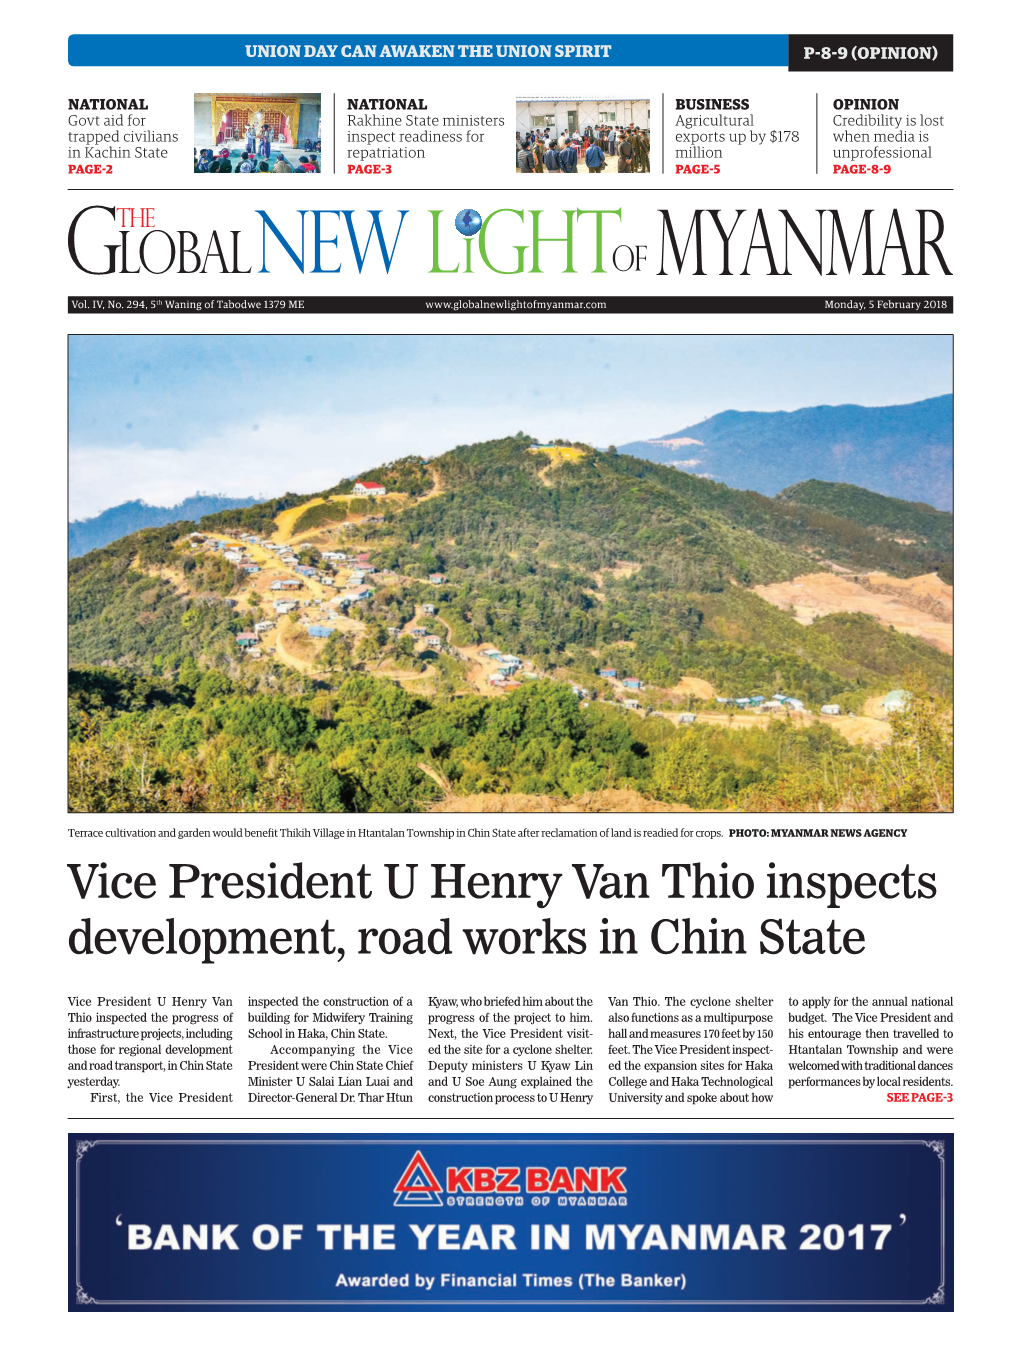 Vice President U Henry Van Thio Inspects Development, Road Works in Chin State